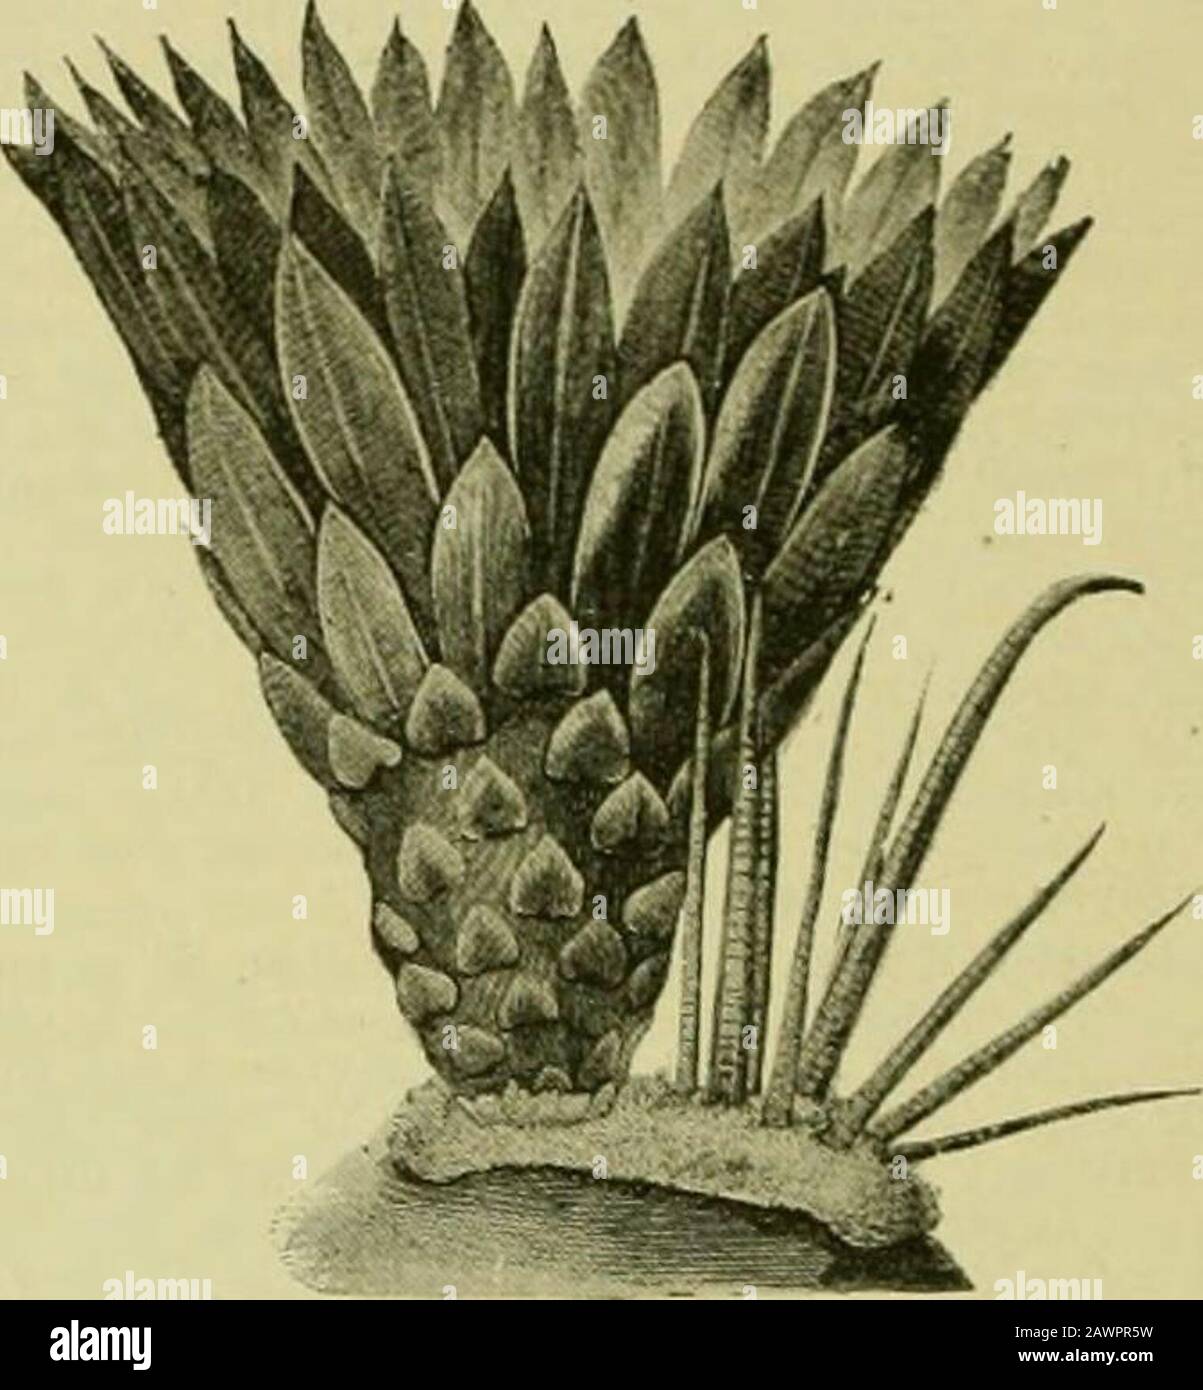 The century supplement to the dictionary of gardening, a practical and scientific encyclopaedia of horticulture for gardeners and botanists . m. Colonido, 1877. E. Digueti (Diguets). Jl. yellow ; petals long, lanceolate ; sepalsred or brown, very short. Stem narrowly ribbed, compressed,concave at apex ; spines in groups of six or seven, lin. to ii,long, needle-like. h. 9ft. to 12ft. Lower ( alif&lt;irnia. A giantspeeies. E. durangensis (Durango). fl. of a brownish-red. Stem ovate-cylindrical, 3in. to lOin. high, having about a score of con-tinuous ribs, bearing tnfts of stout, yellowisli an Stock Photo